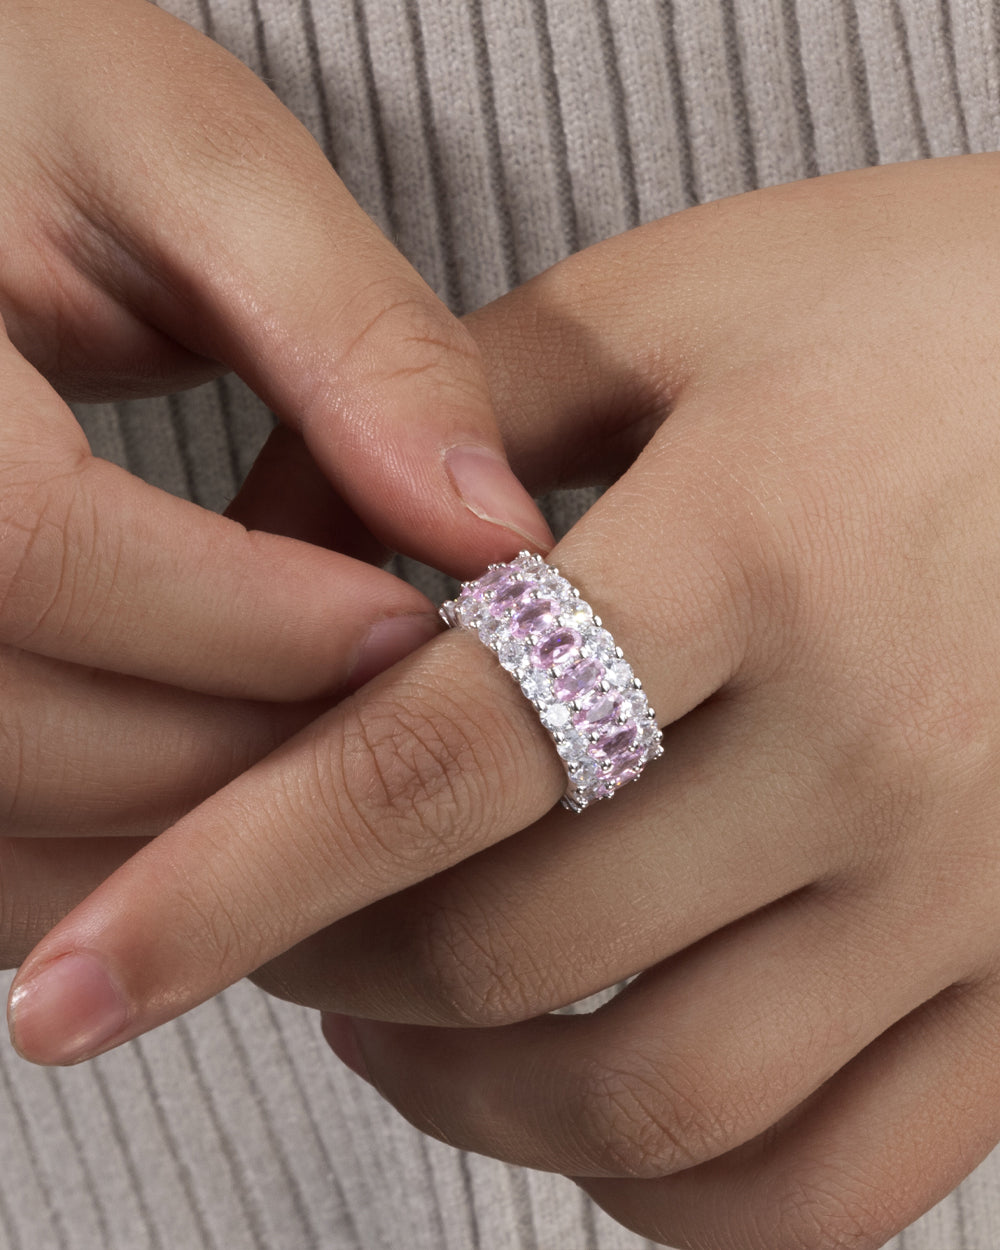 FROSTED PINK STONE RING. - WHITE GOLD